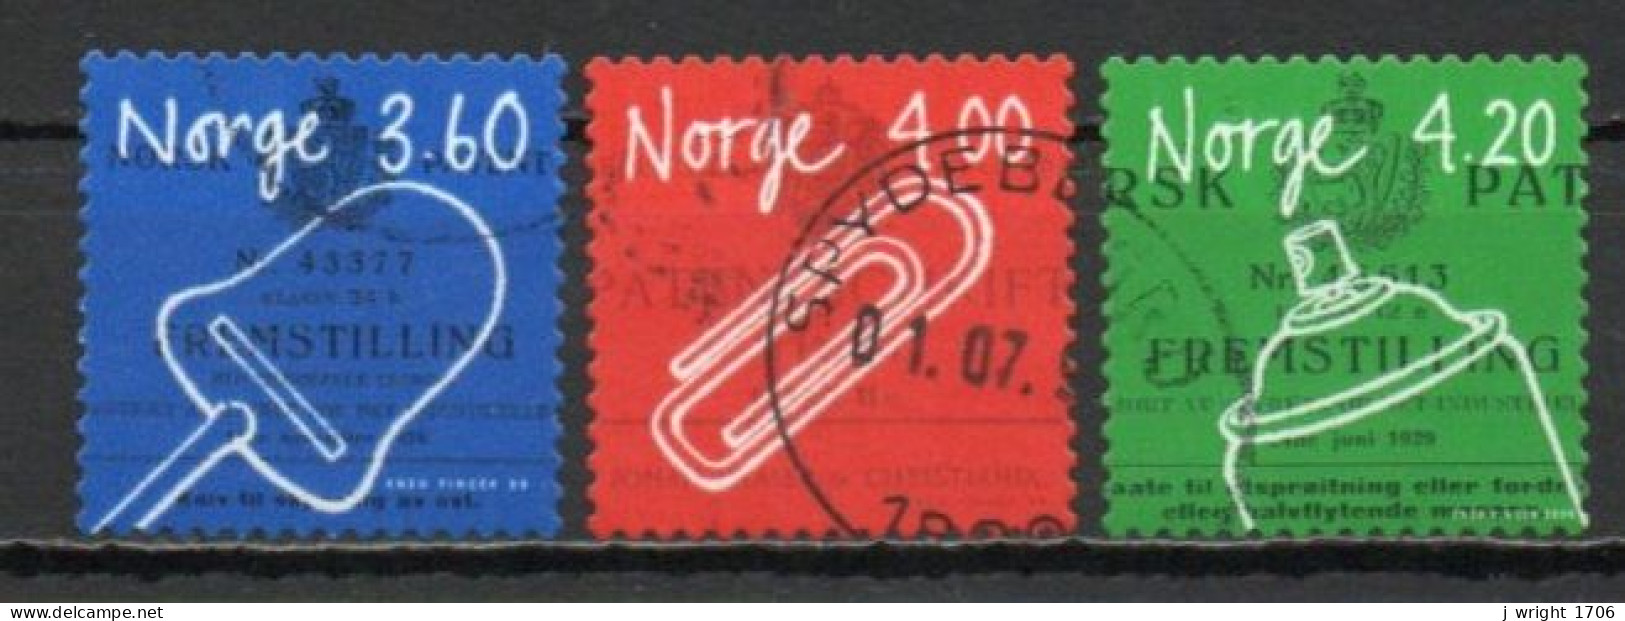 Norway, 1999-2000, Norwegian Inventions, Set, USED - Used Stamps